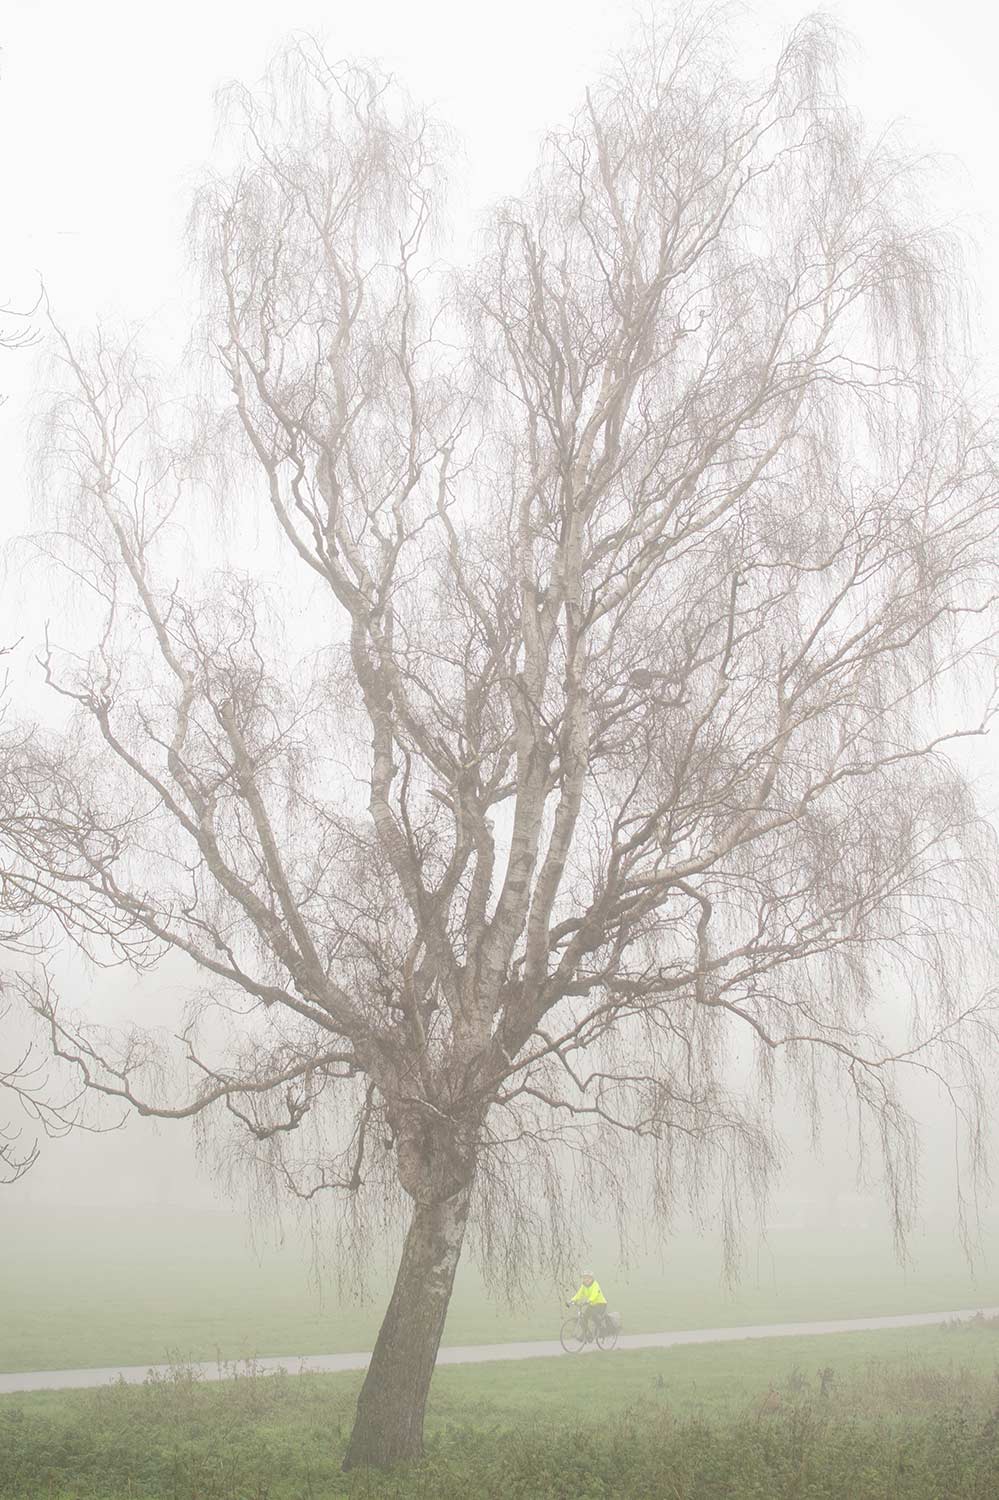 birch tree in mist on Midsummer Common, Cambridge, with cyclist in yellow top passing by.